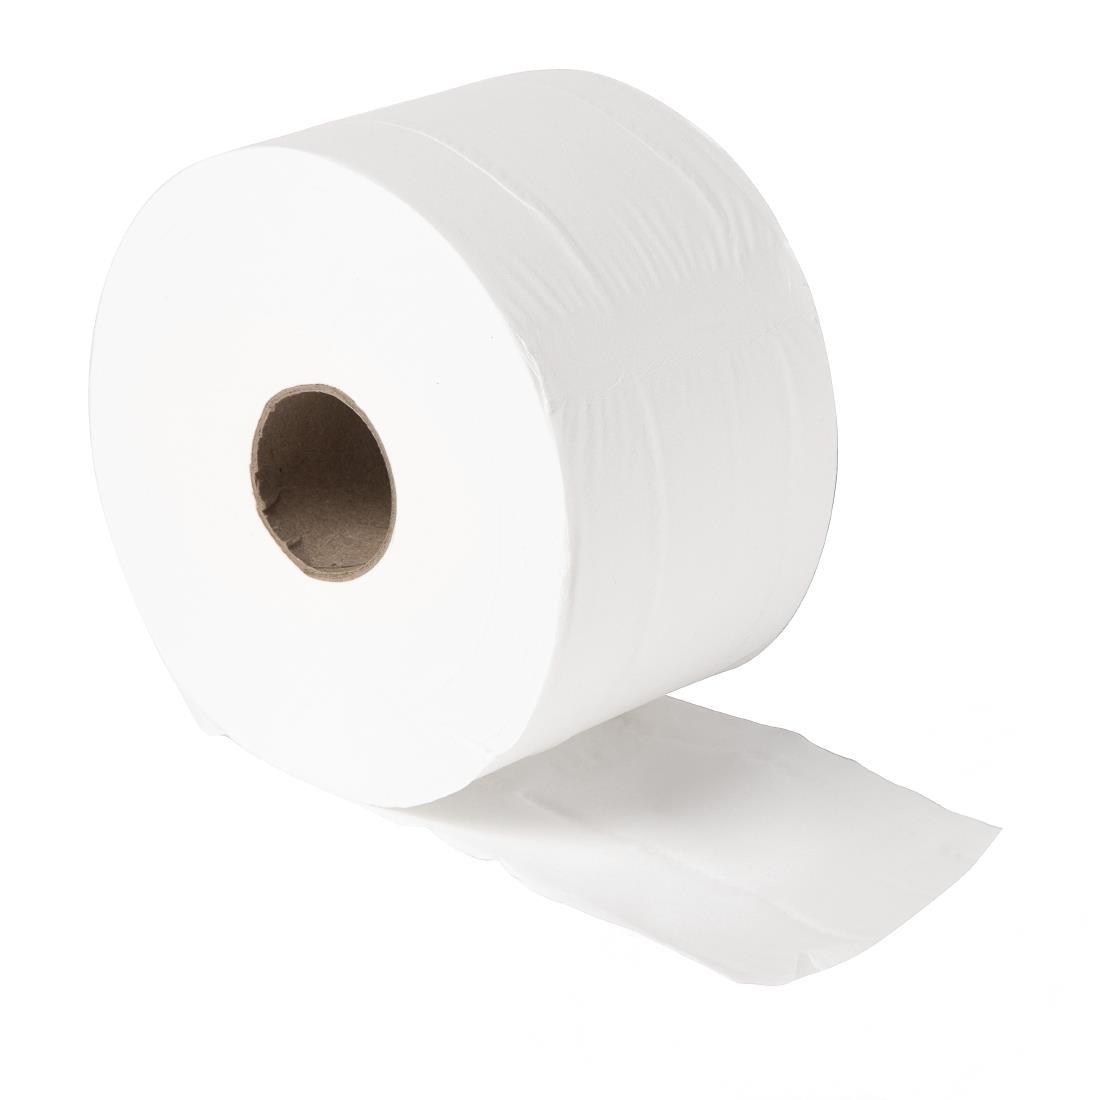 Jantex Micro Twin Toilet Paper 2-Ply 125m (Pack of 24) - GL063  - 4